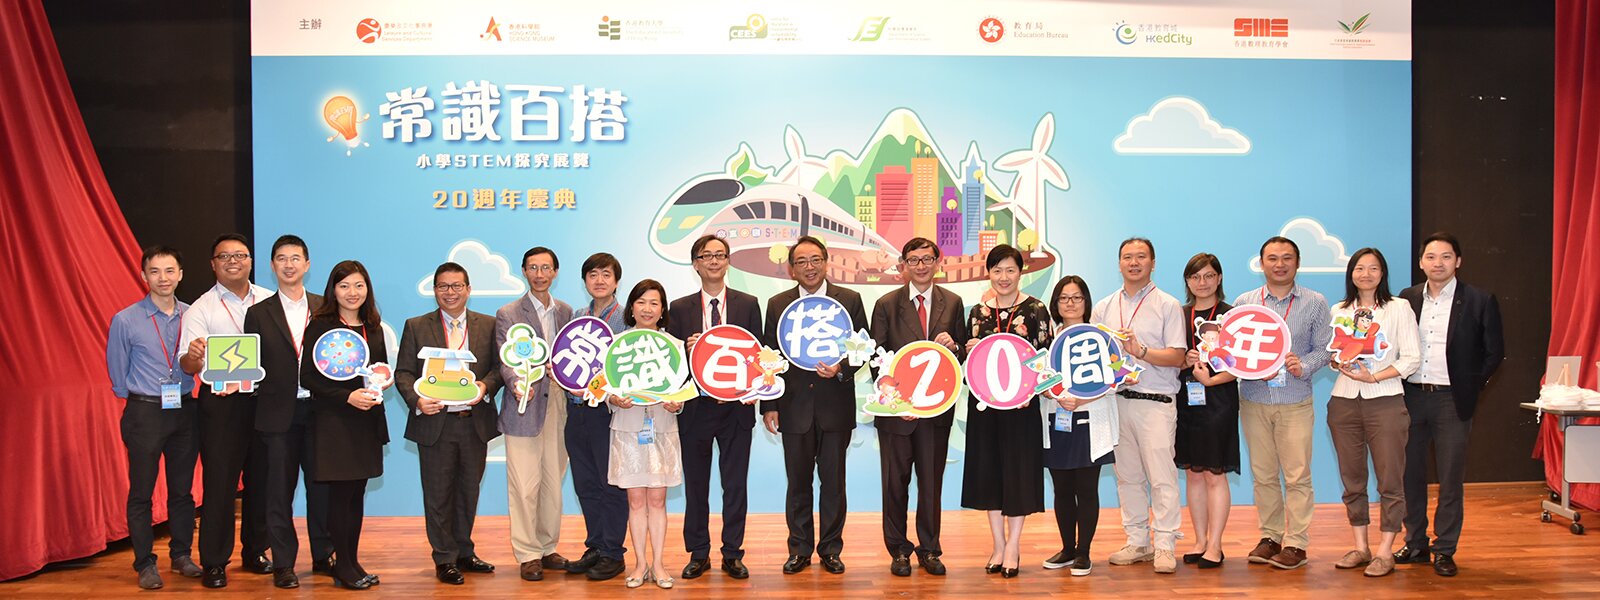 20th Anniversary Celebration for Primary STEM Project Exhibition at EdUHK